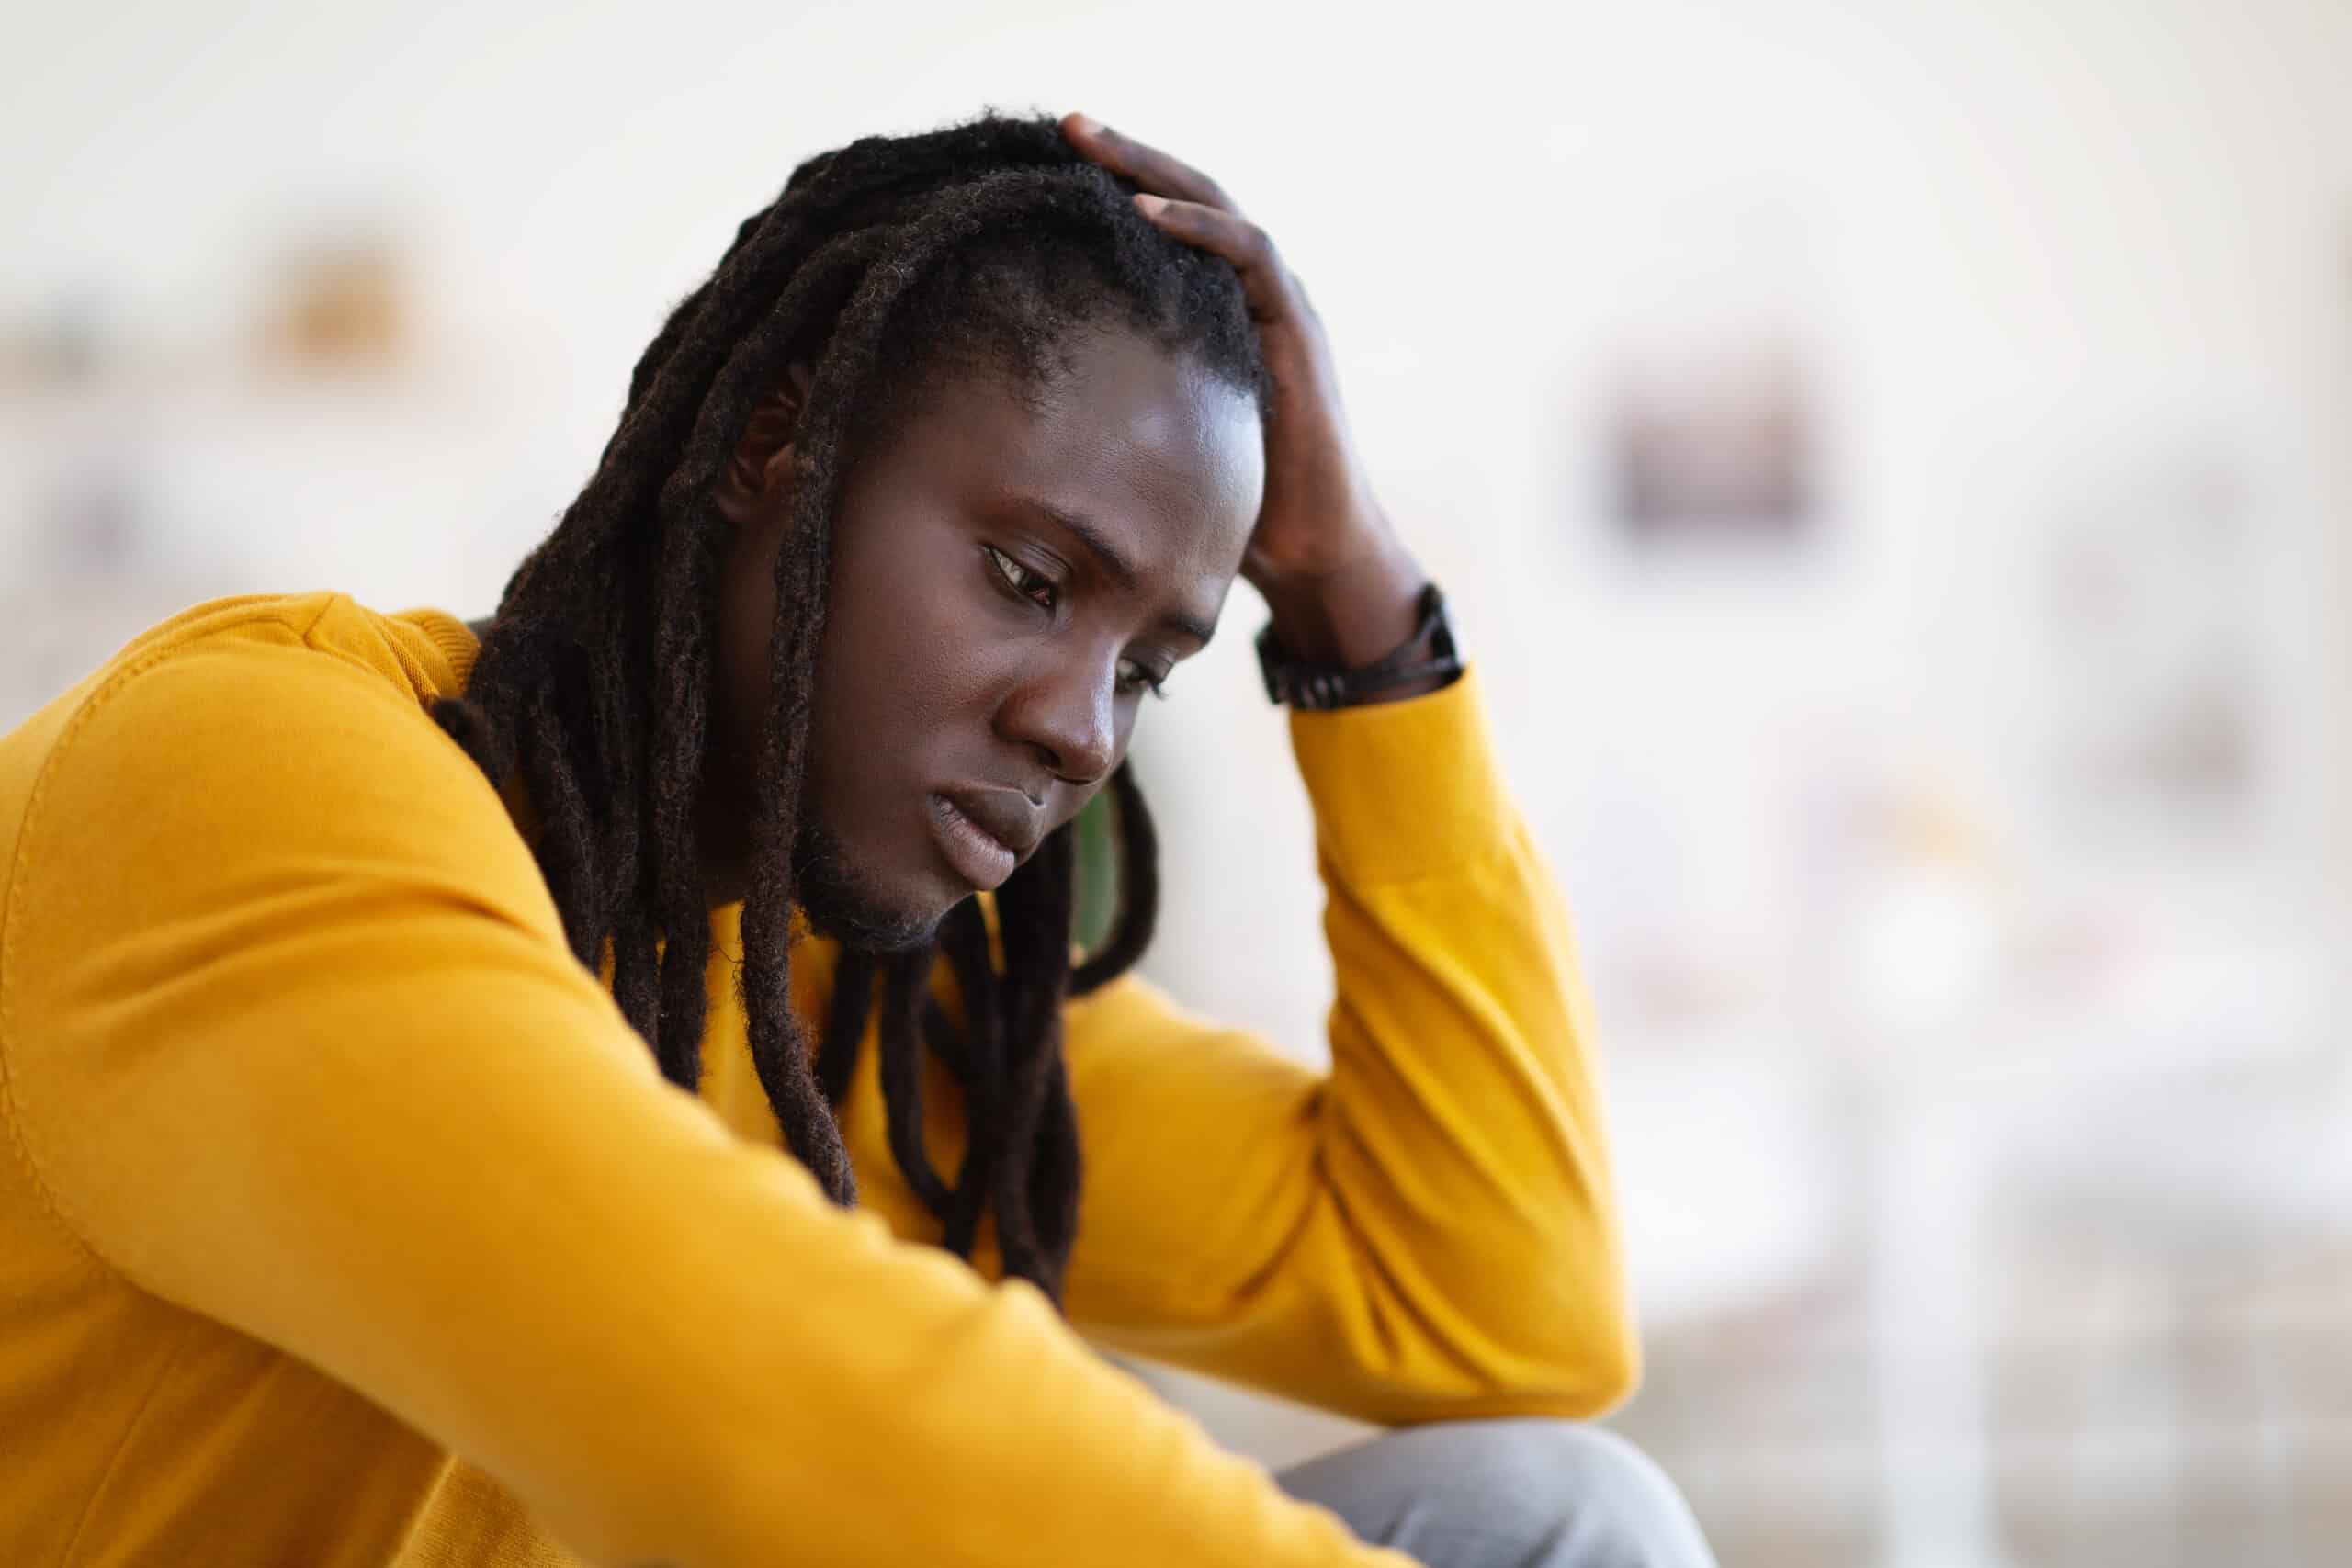 Closeup Portrait Of Depressed African American Guy Sitting At Home, Upset Pensive Black Man Leaning Head On Hand And Looking Away, Suffering Life Problems Or Seasonal Depression, Copy Space